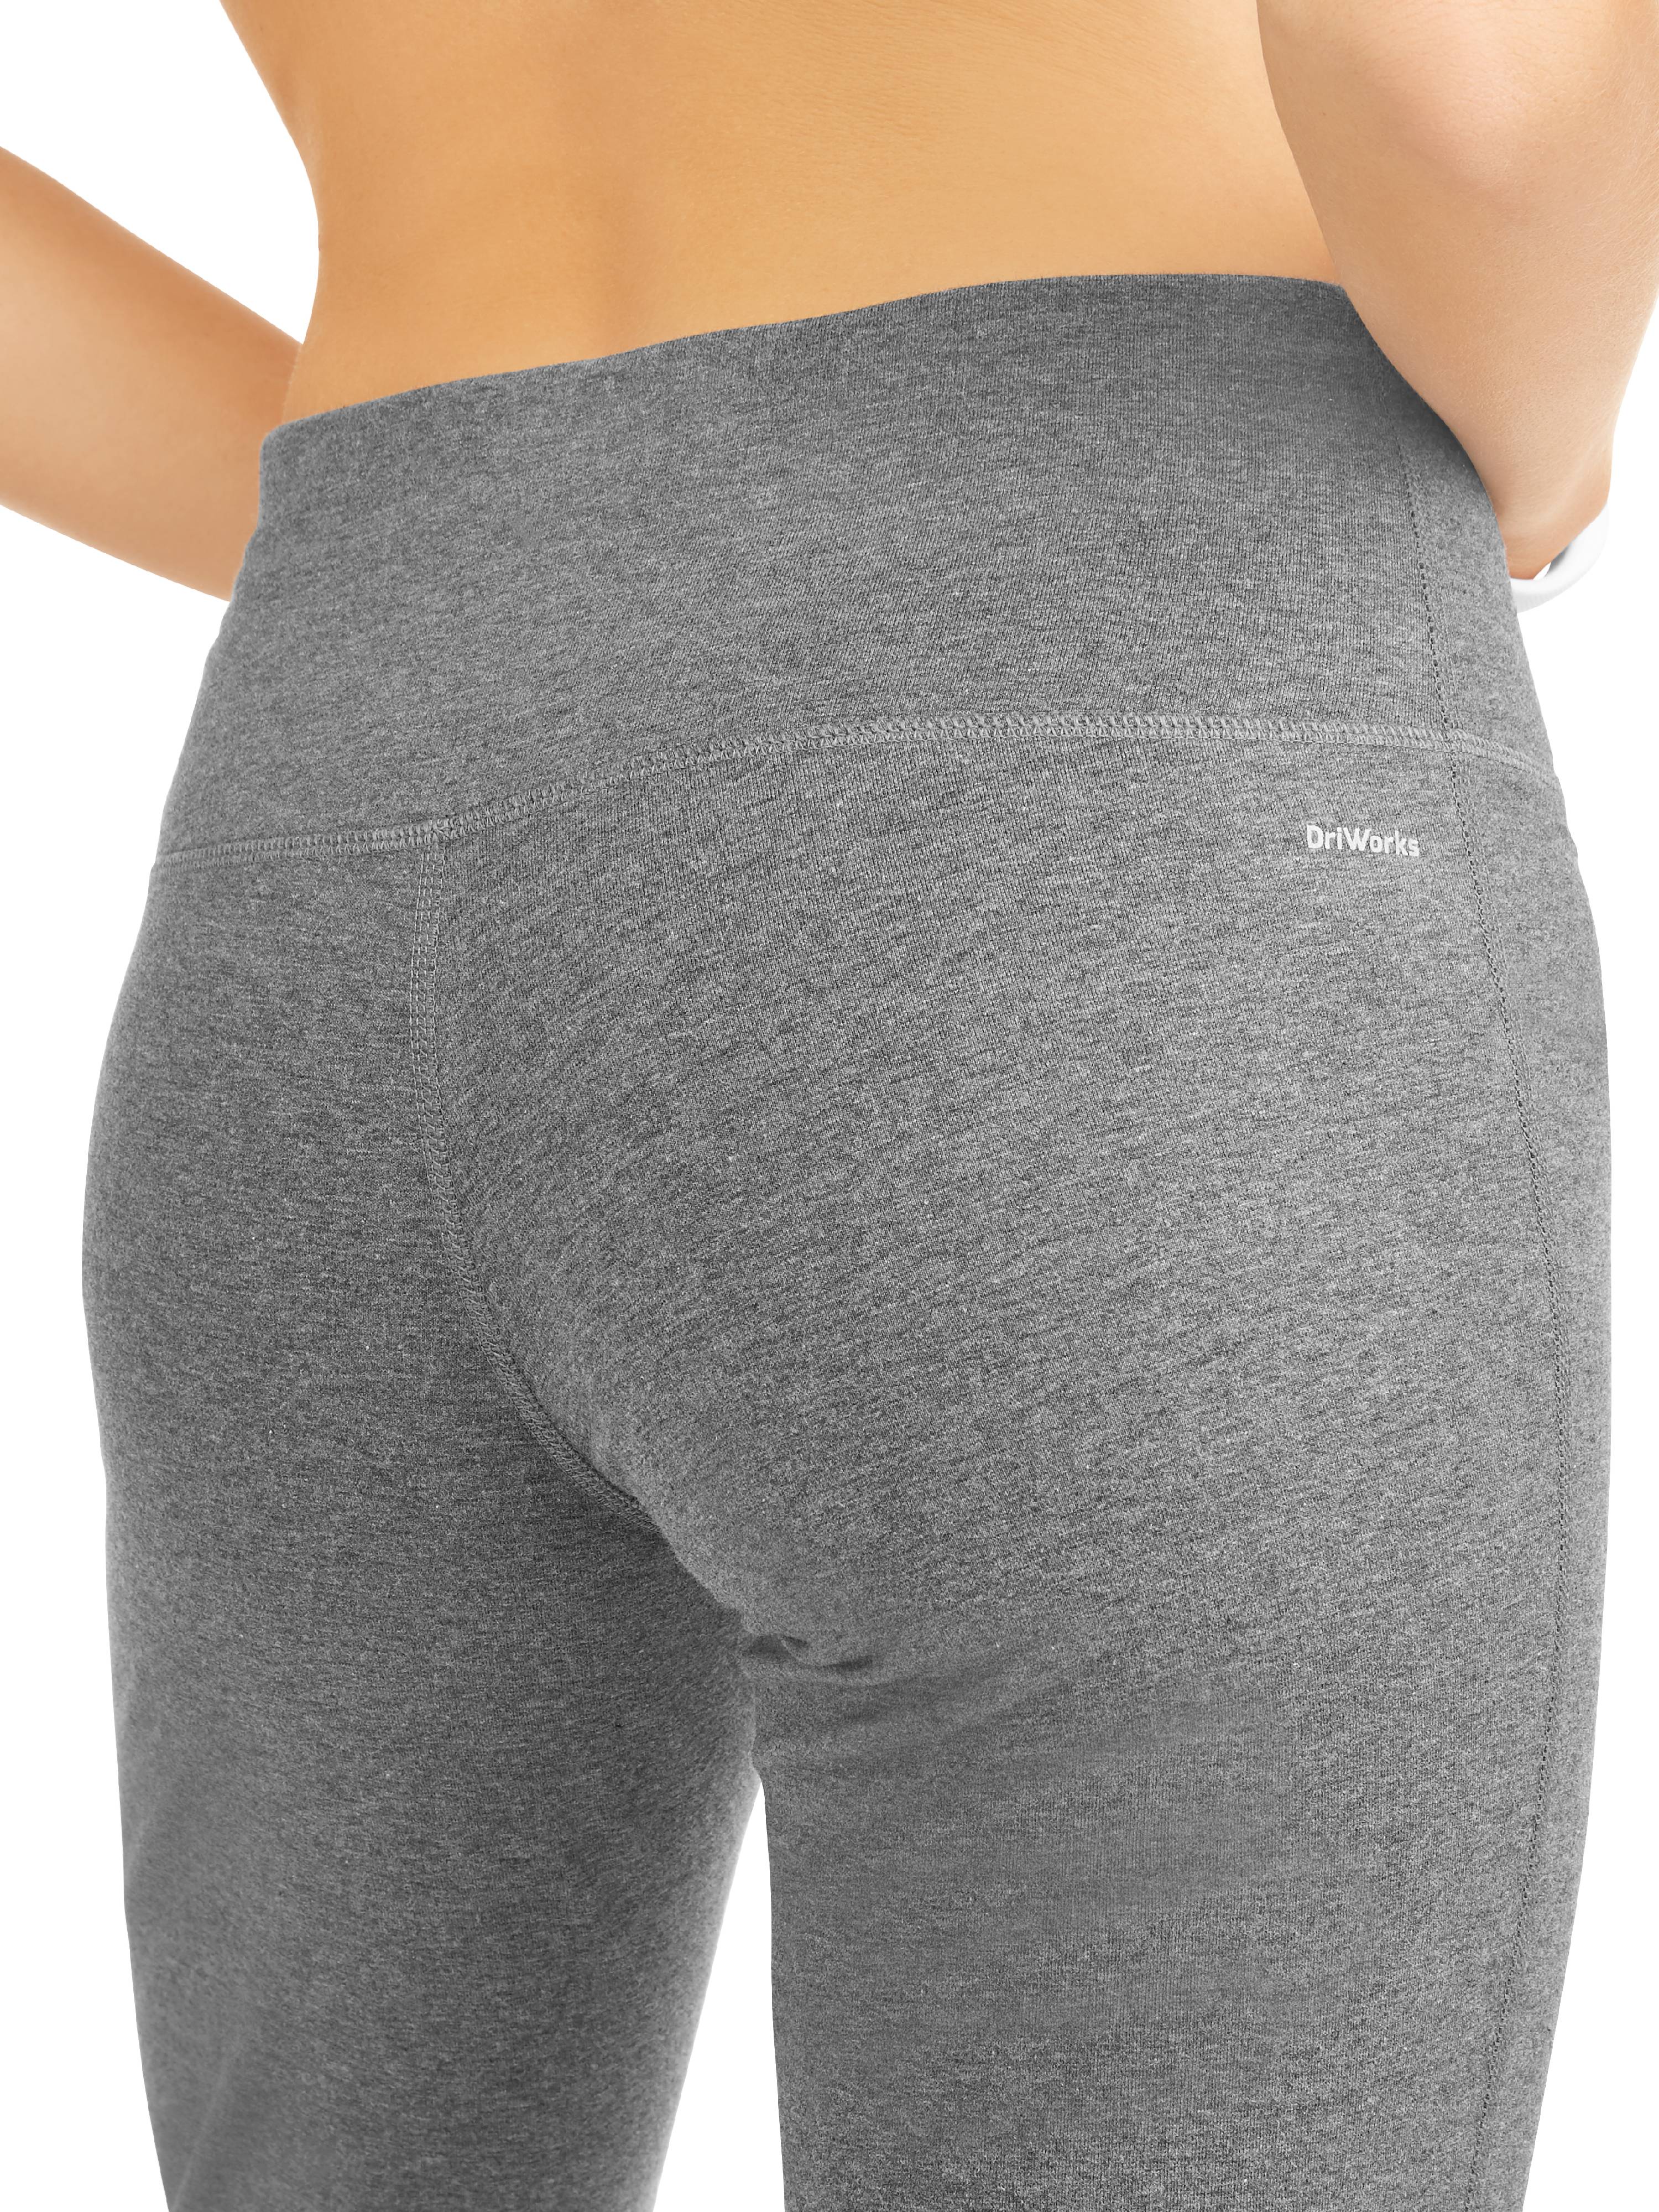 Athletic Works Women's Athleisure Performance Straight Leg Pant Available in Regular and Petite - image 4 of 4